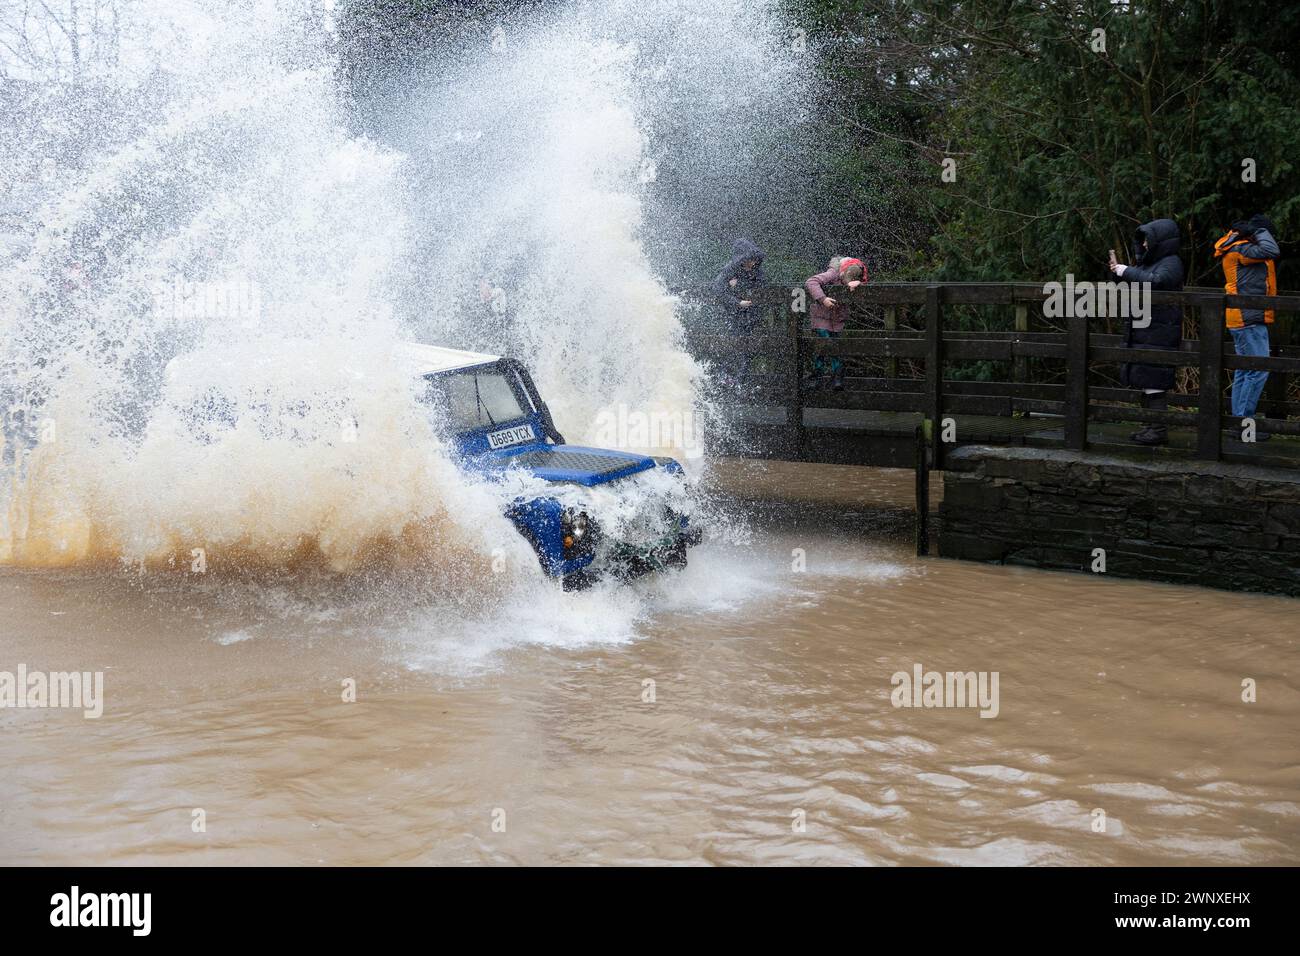 20/02/22   Land Rover Defender splashes young spectators.  As heavy rain and river levels rise, more than sixty spectators turn-out to watch 4X4 drive Stock Photo